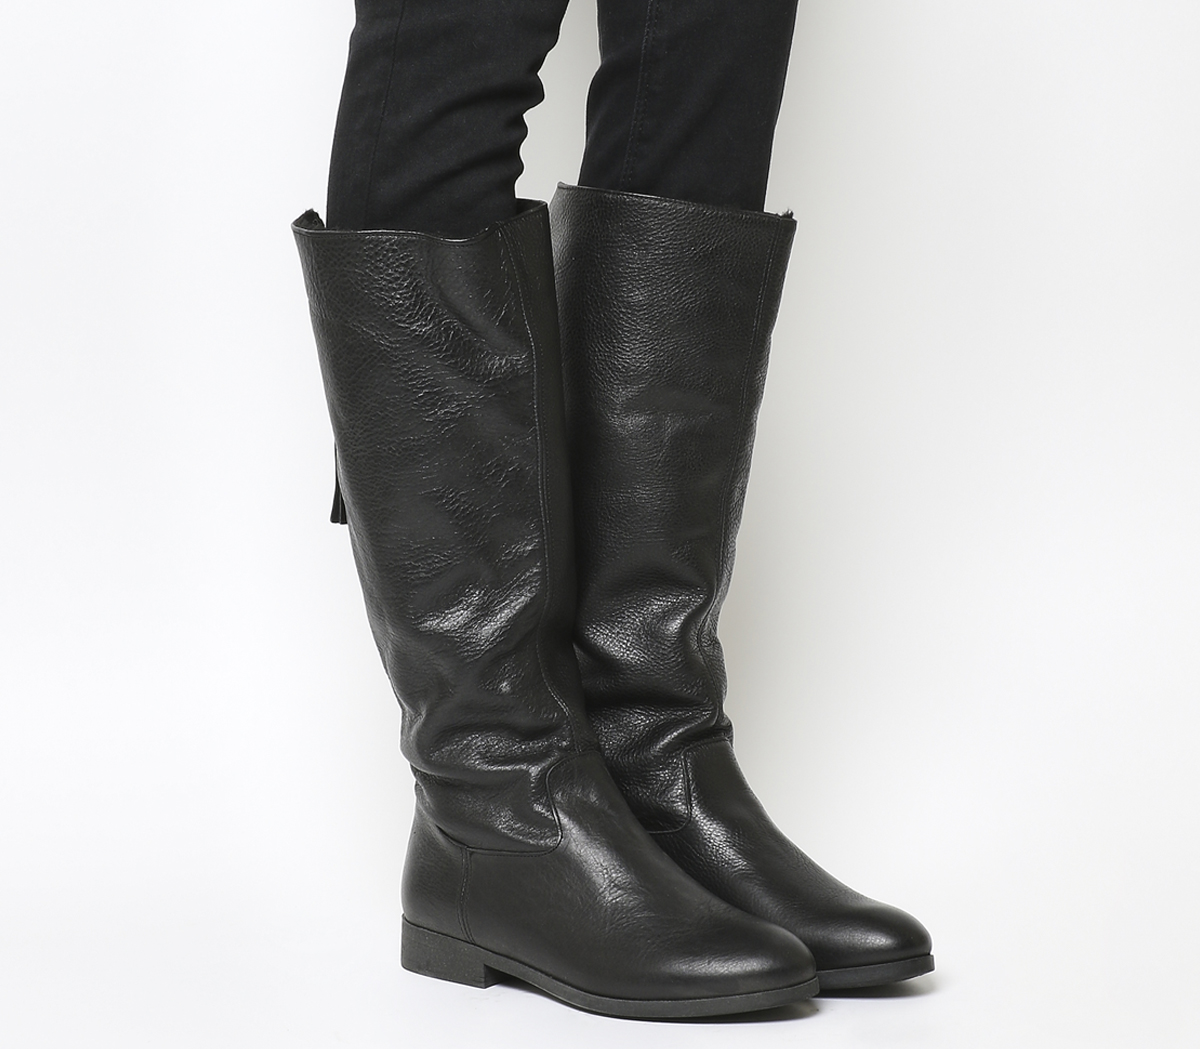 OFFICE Ecru Back Zip Knee Boots Black Leather Fur Lined - Knee High Boots